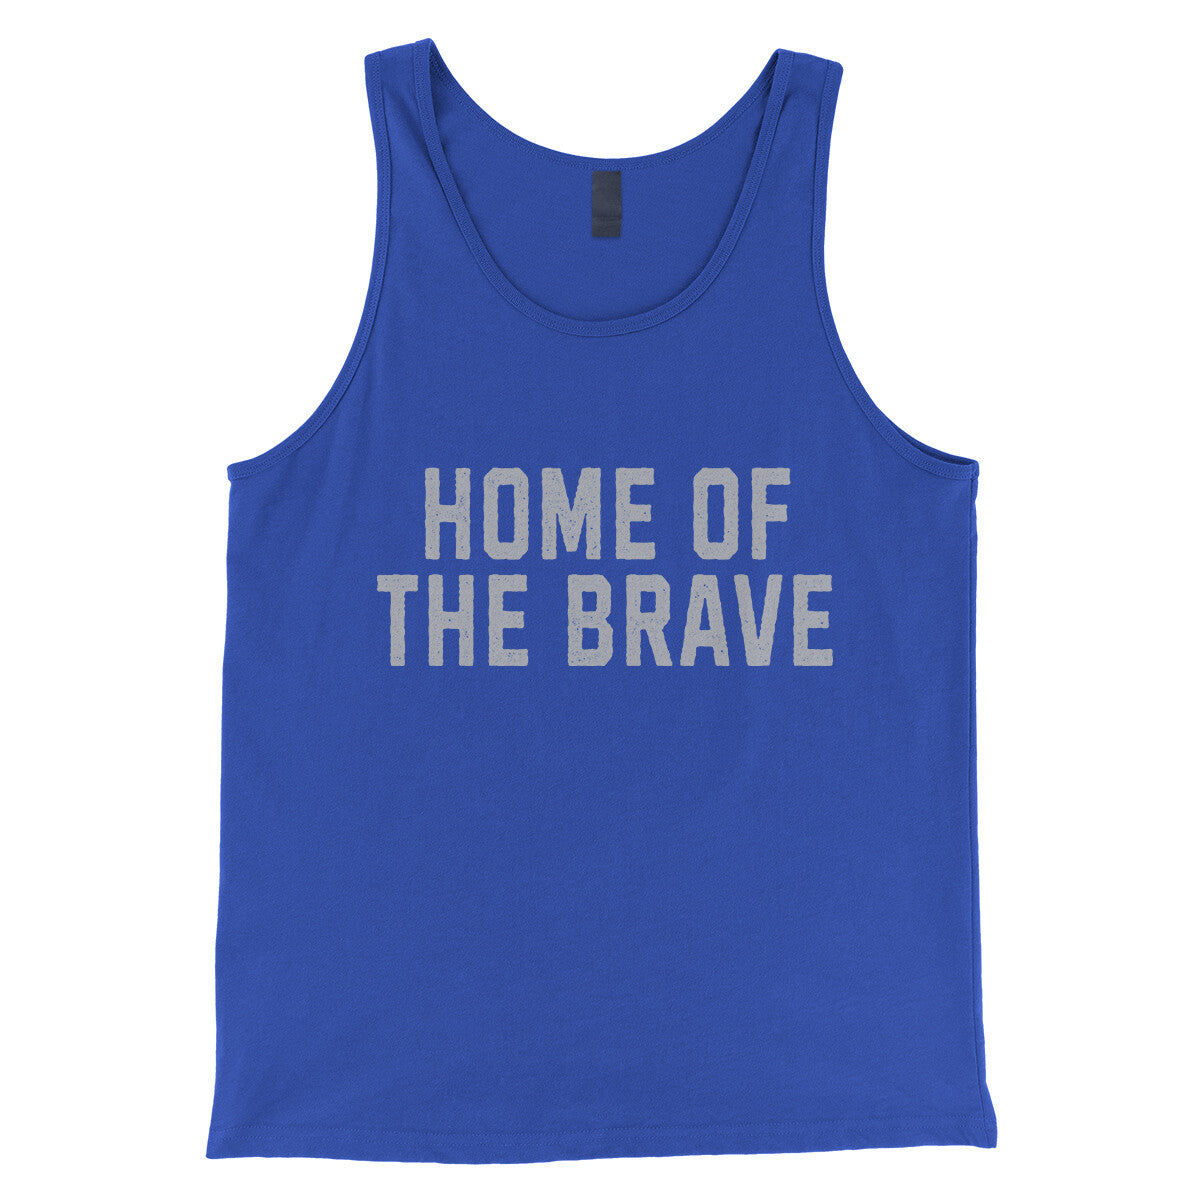 Home of the Brave in True Royal Color